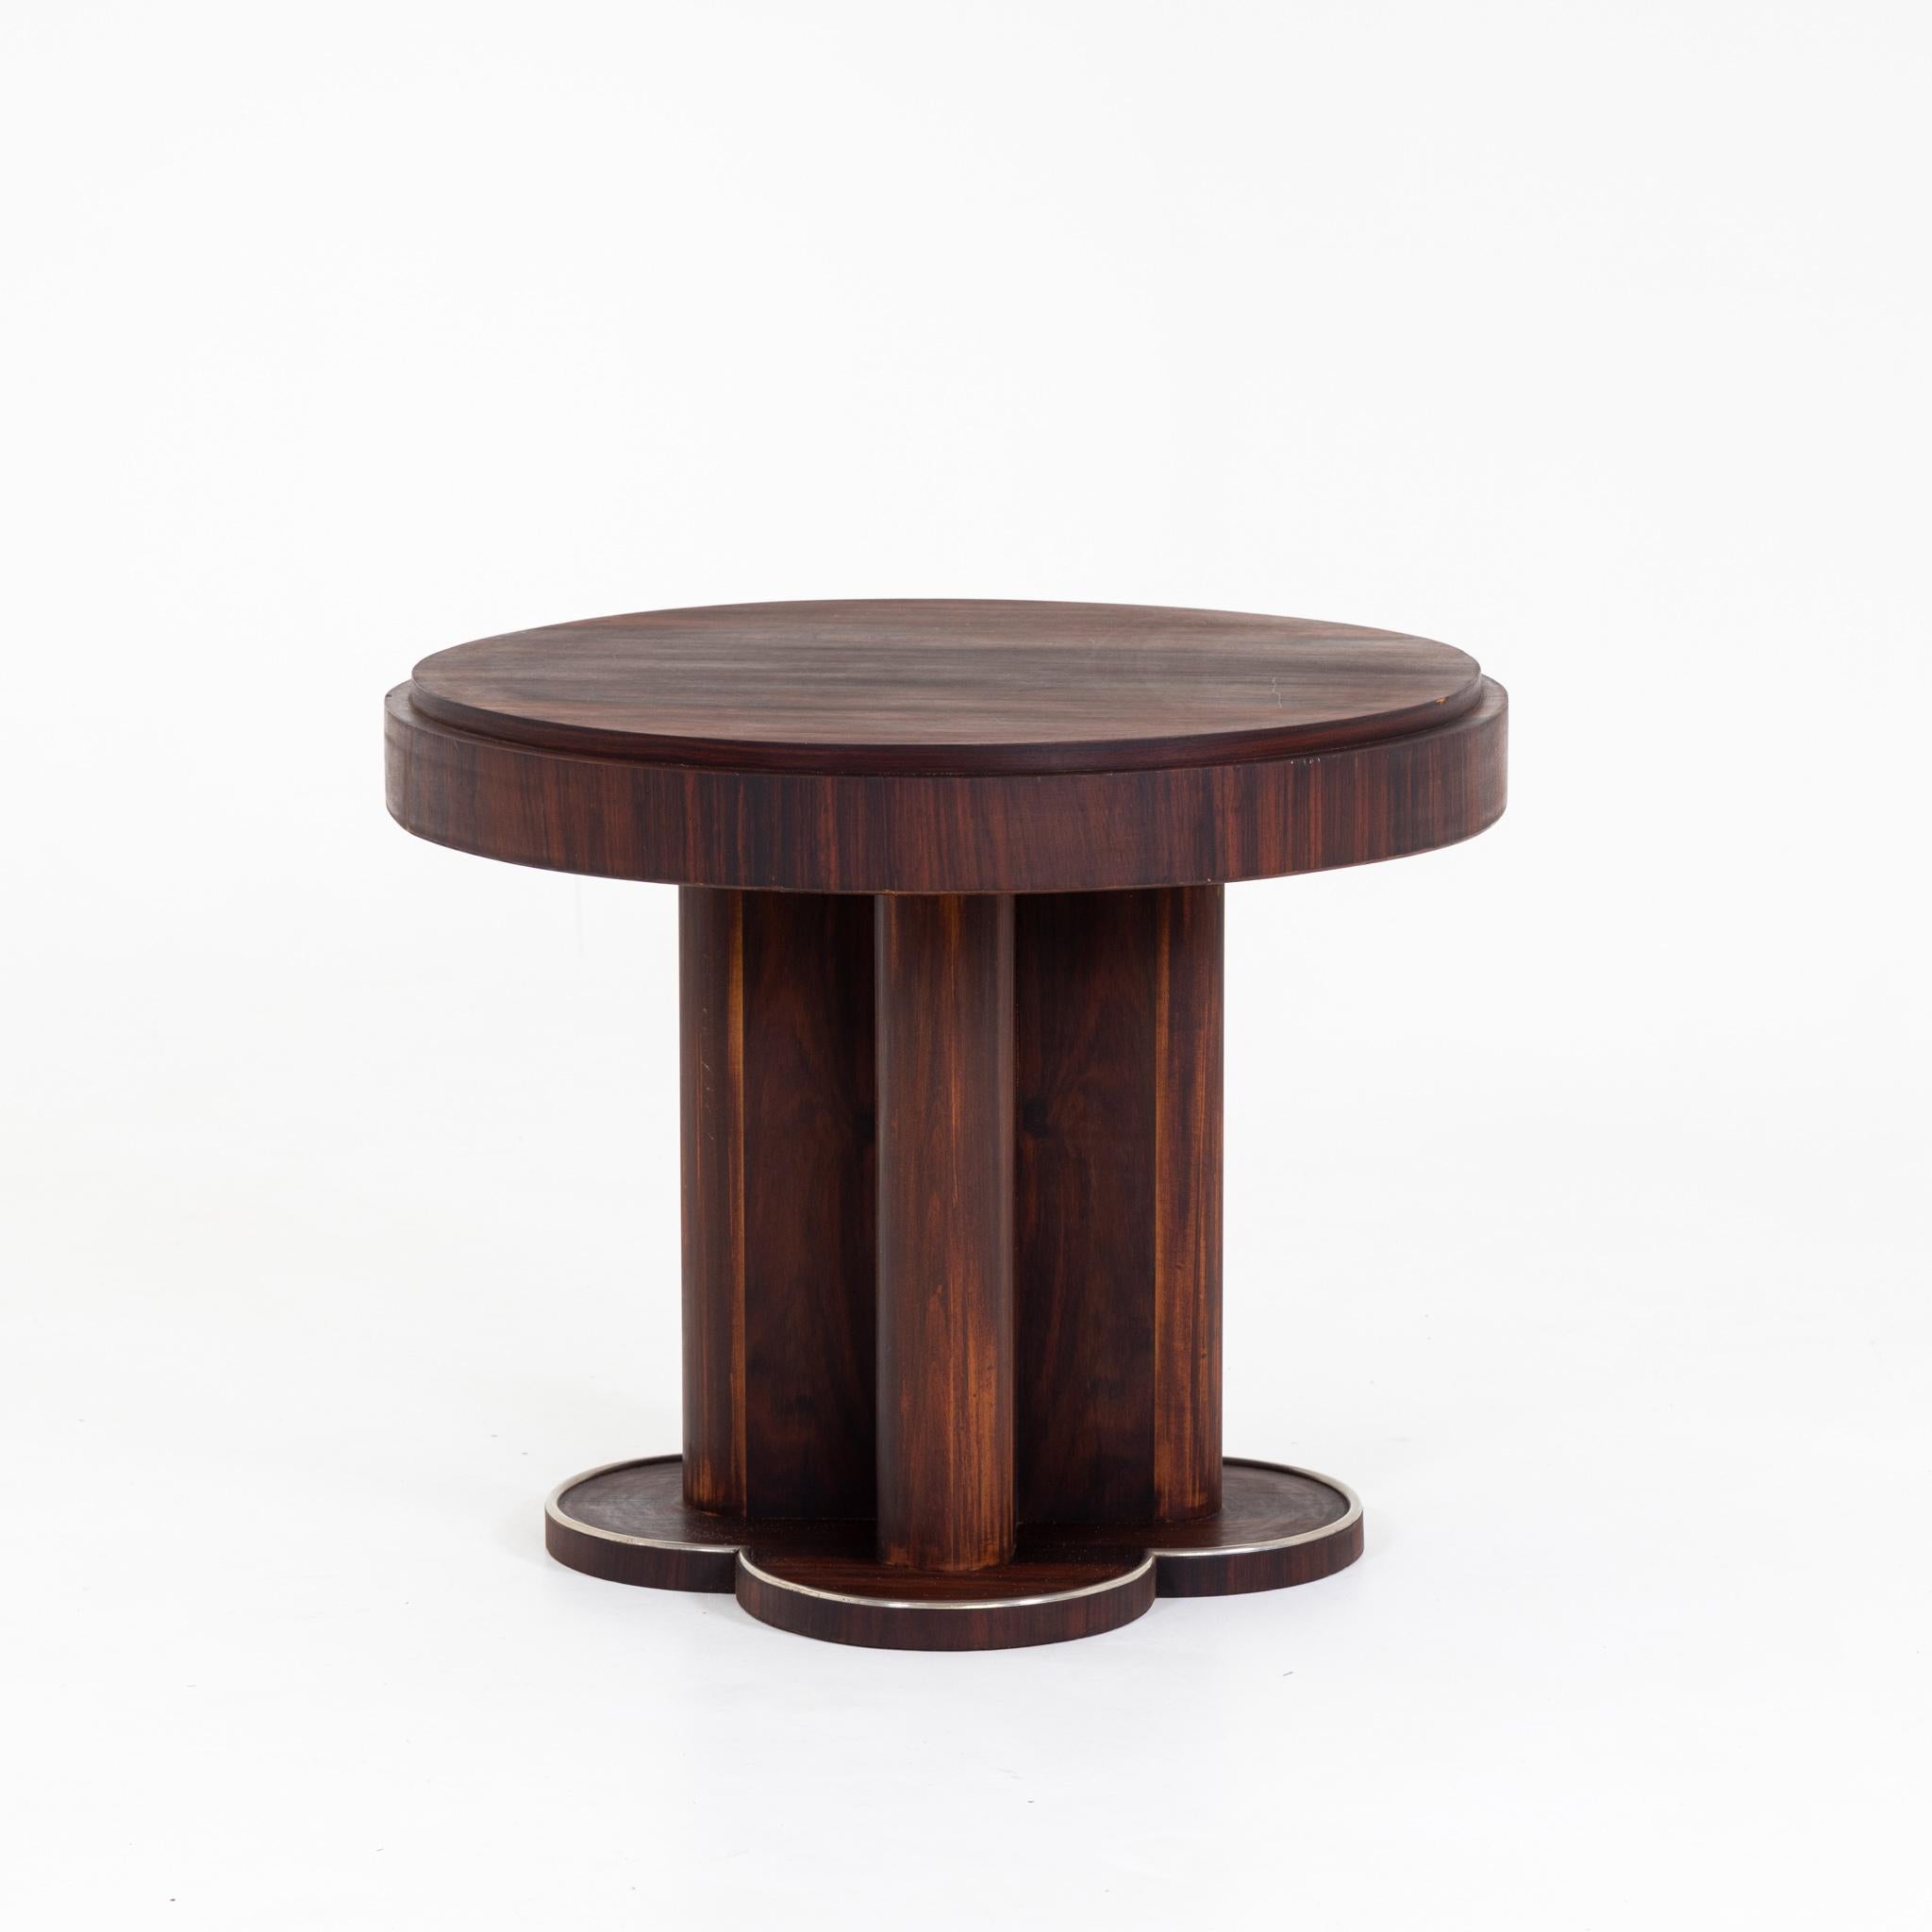 Table standing on four-piece pedestal with round tabletop and cross-shaped pedestal column.